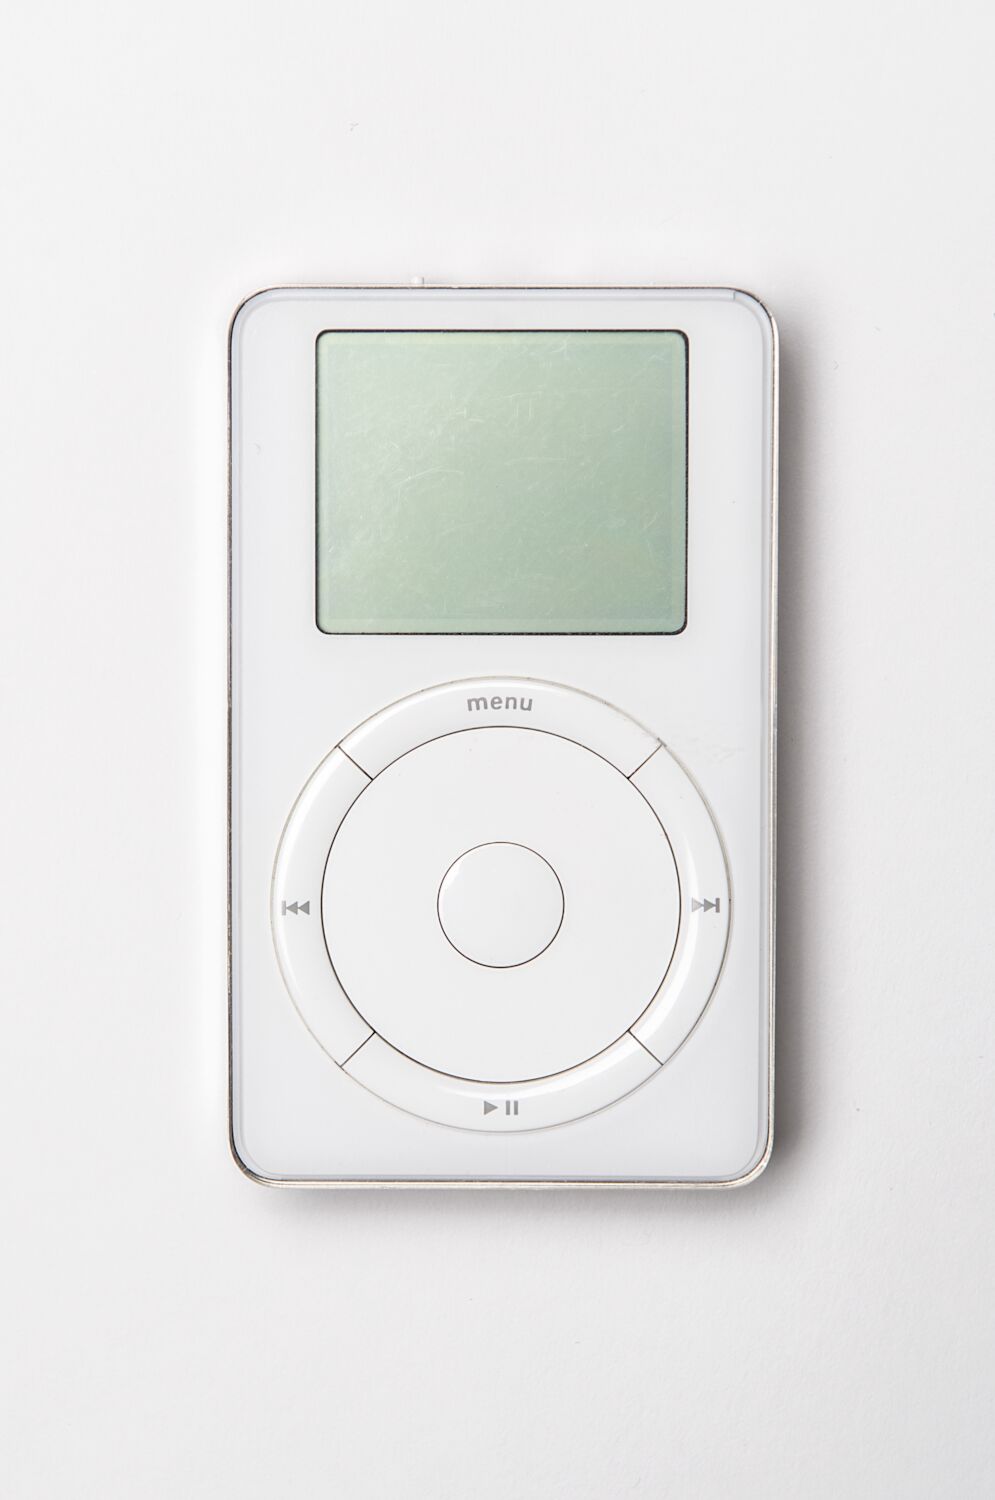 A first generation iPod belonging to Steve, with clickwheel and blank screen.